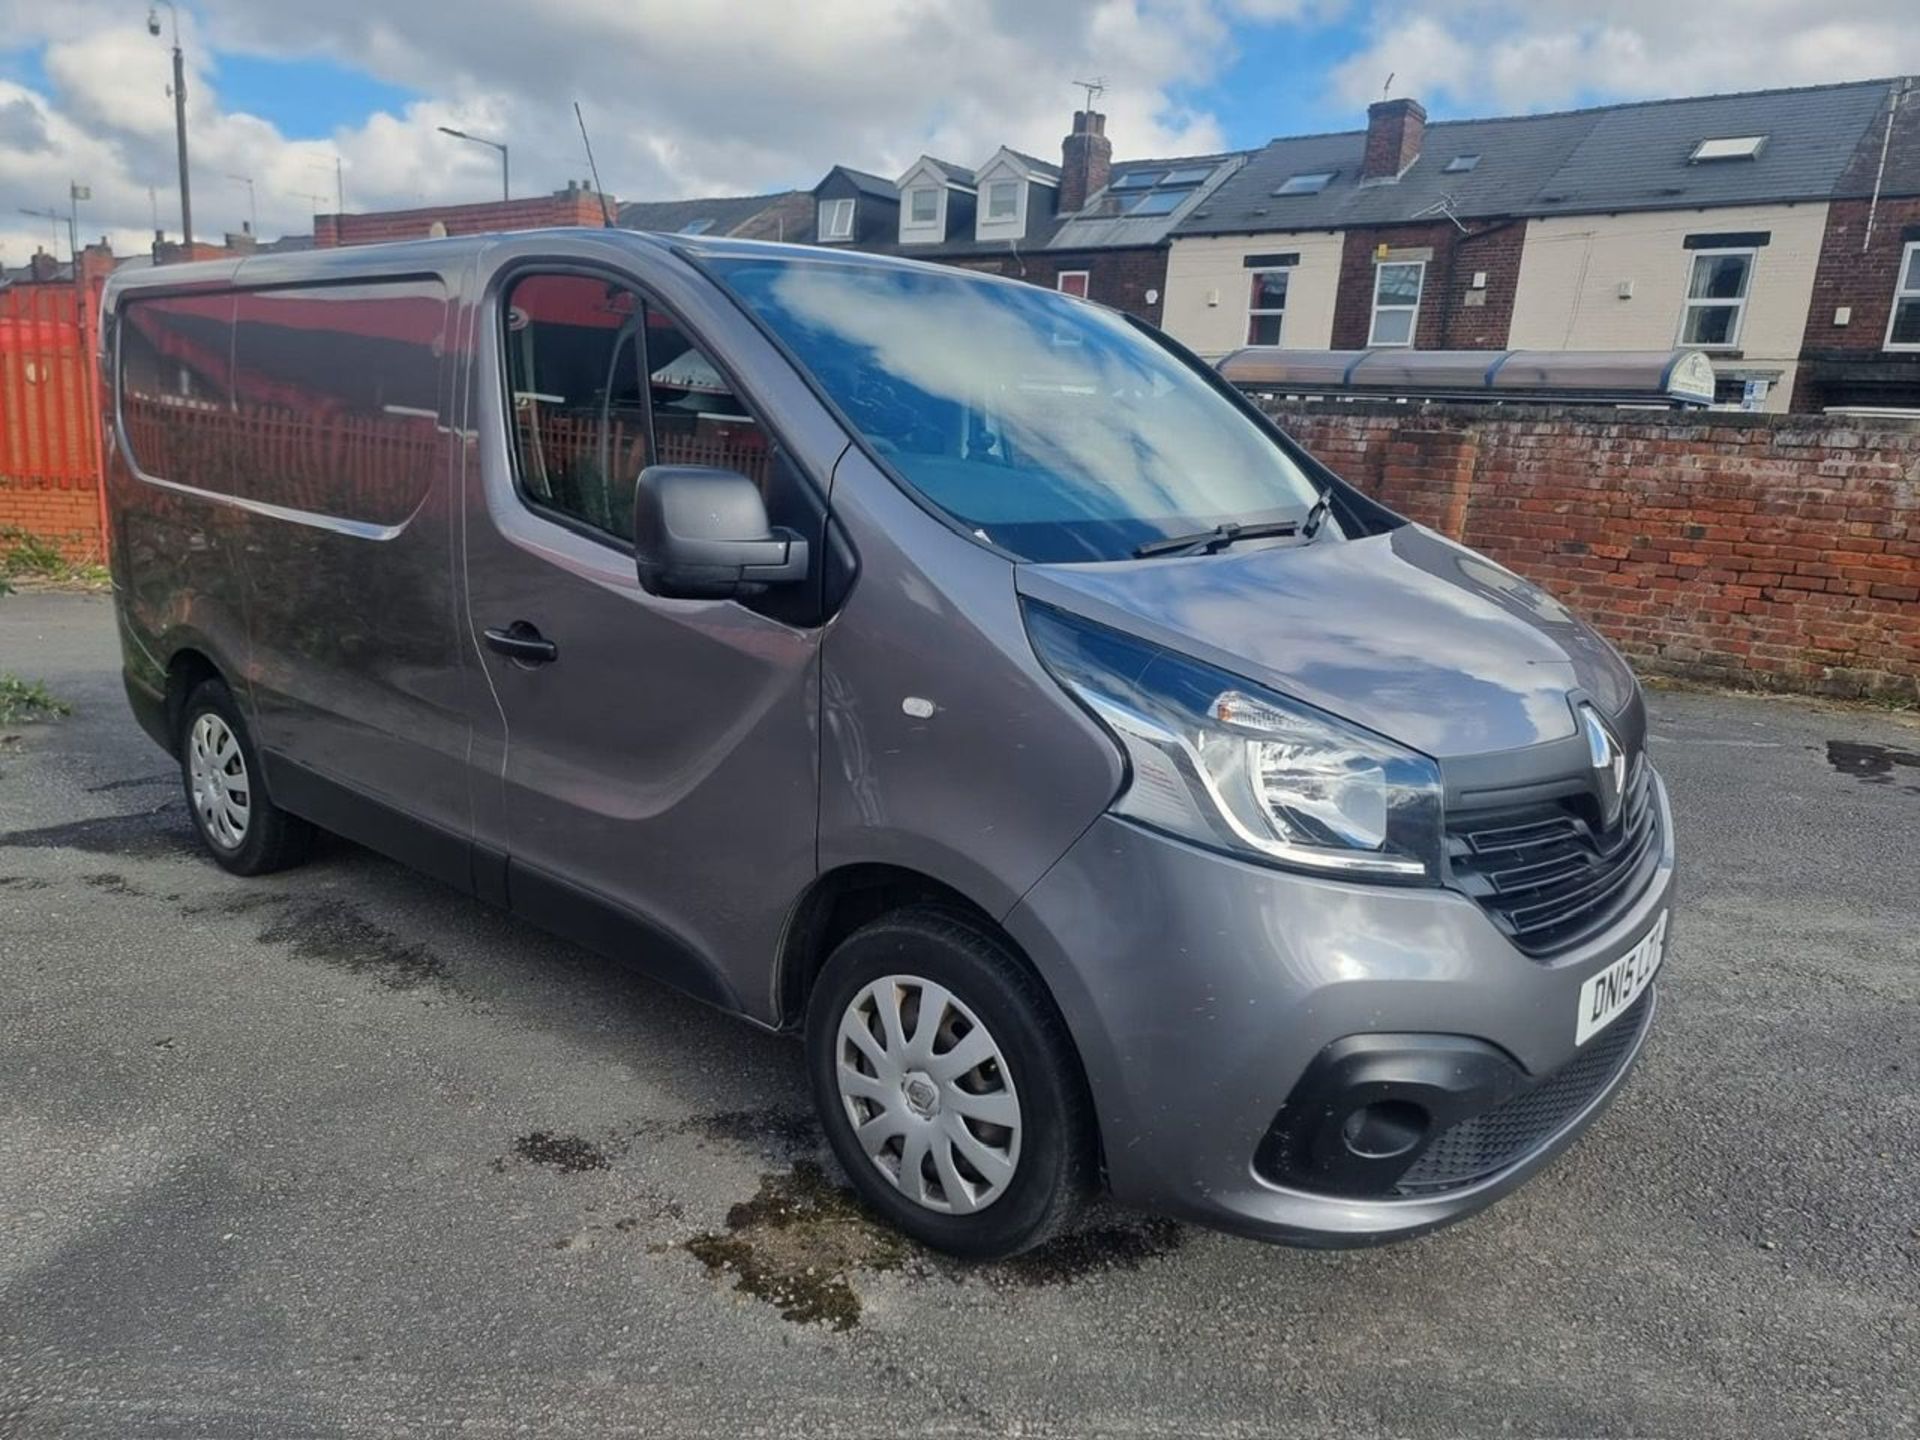 DN15 LZT RENAULT TRAFIC 2.7T 1.6 SL27 DCI 115 BUSINESS+ Panel Van. Comes with 1 key Date of